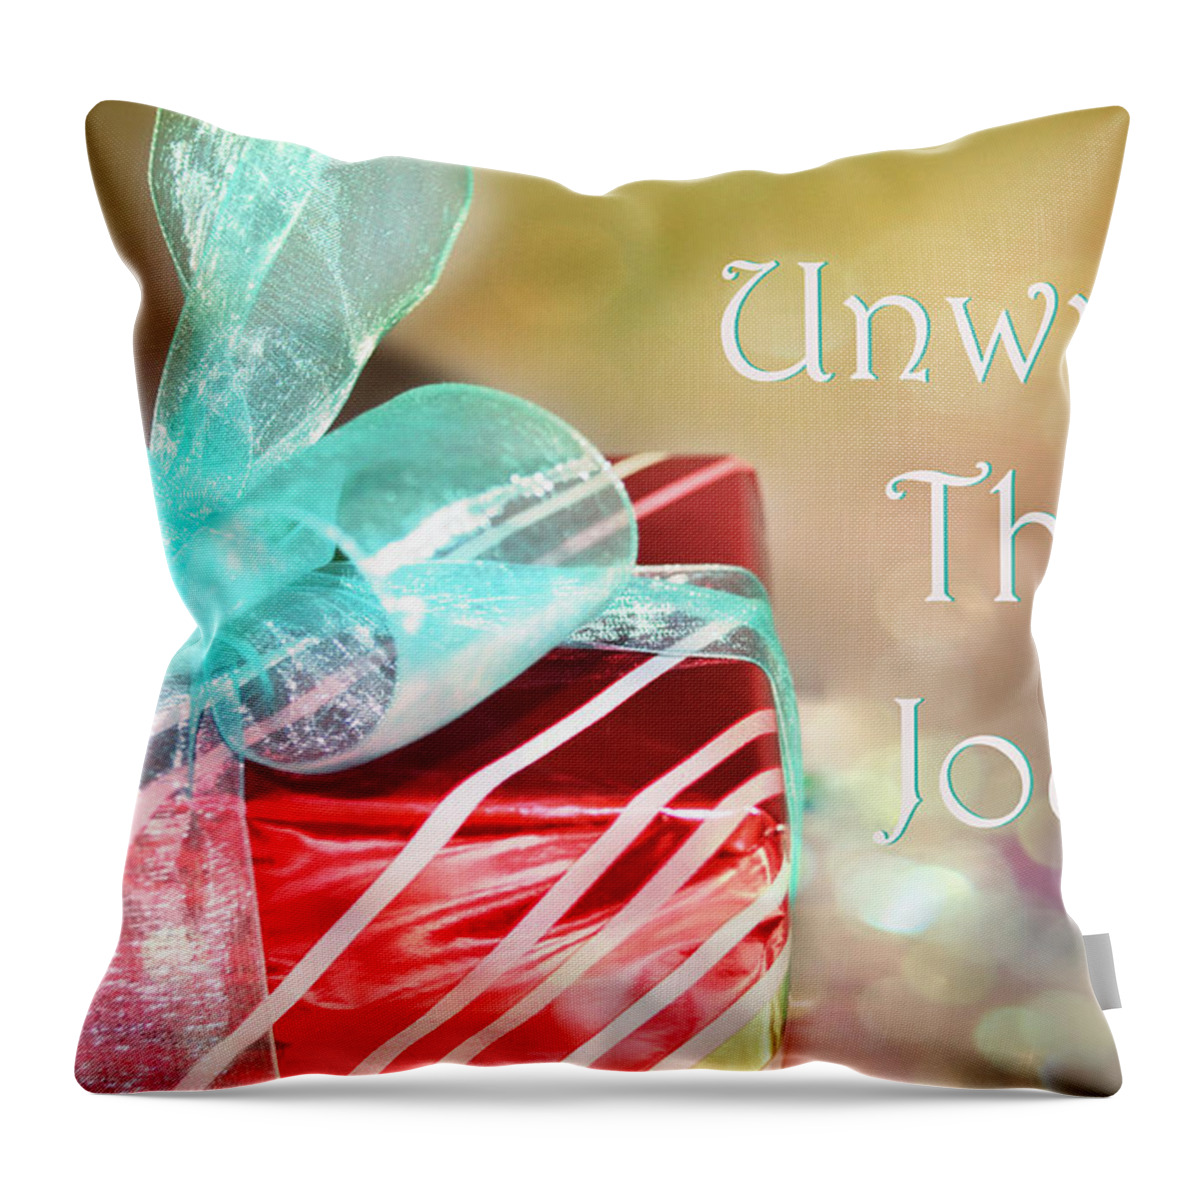 Photoshop Throw Pillow featuring the photograph Unwrap The Joy by Paulette B Wright